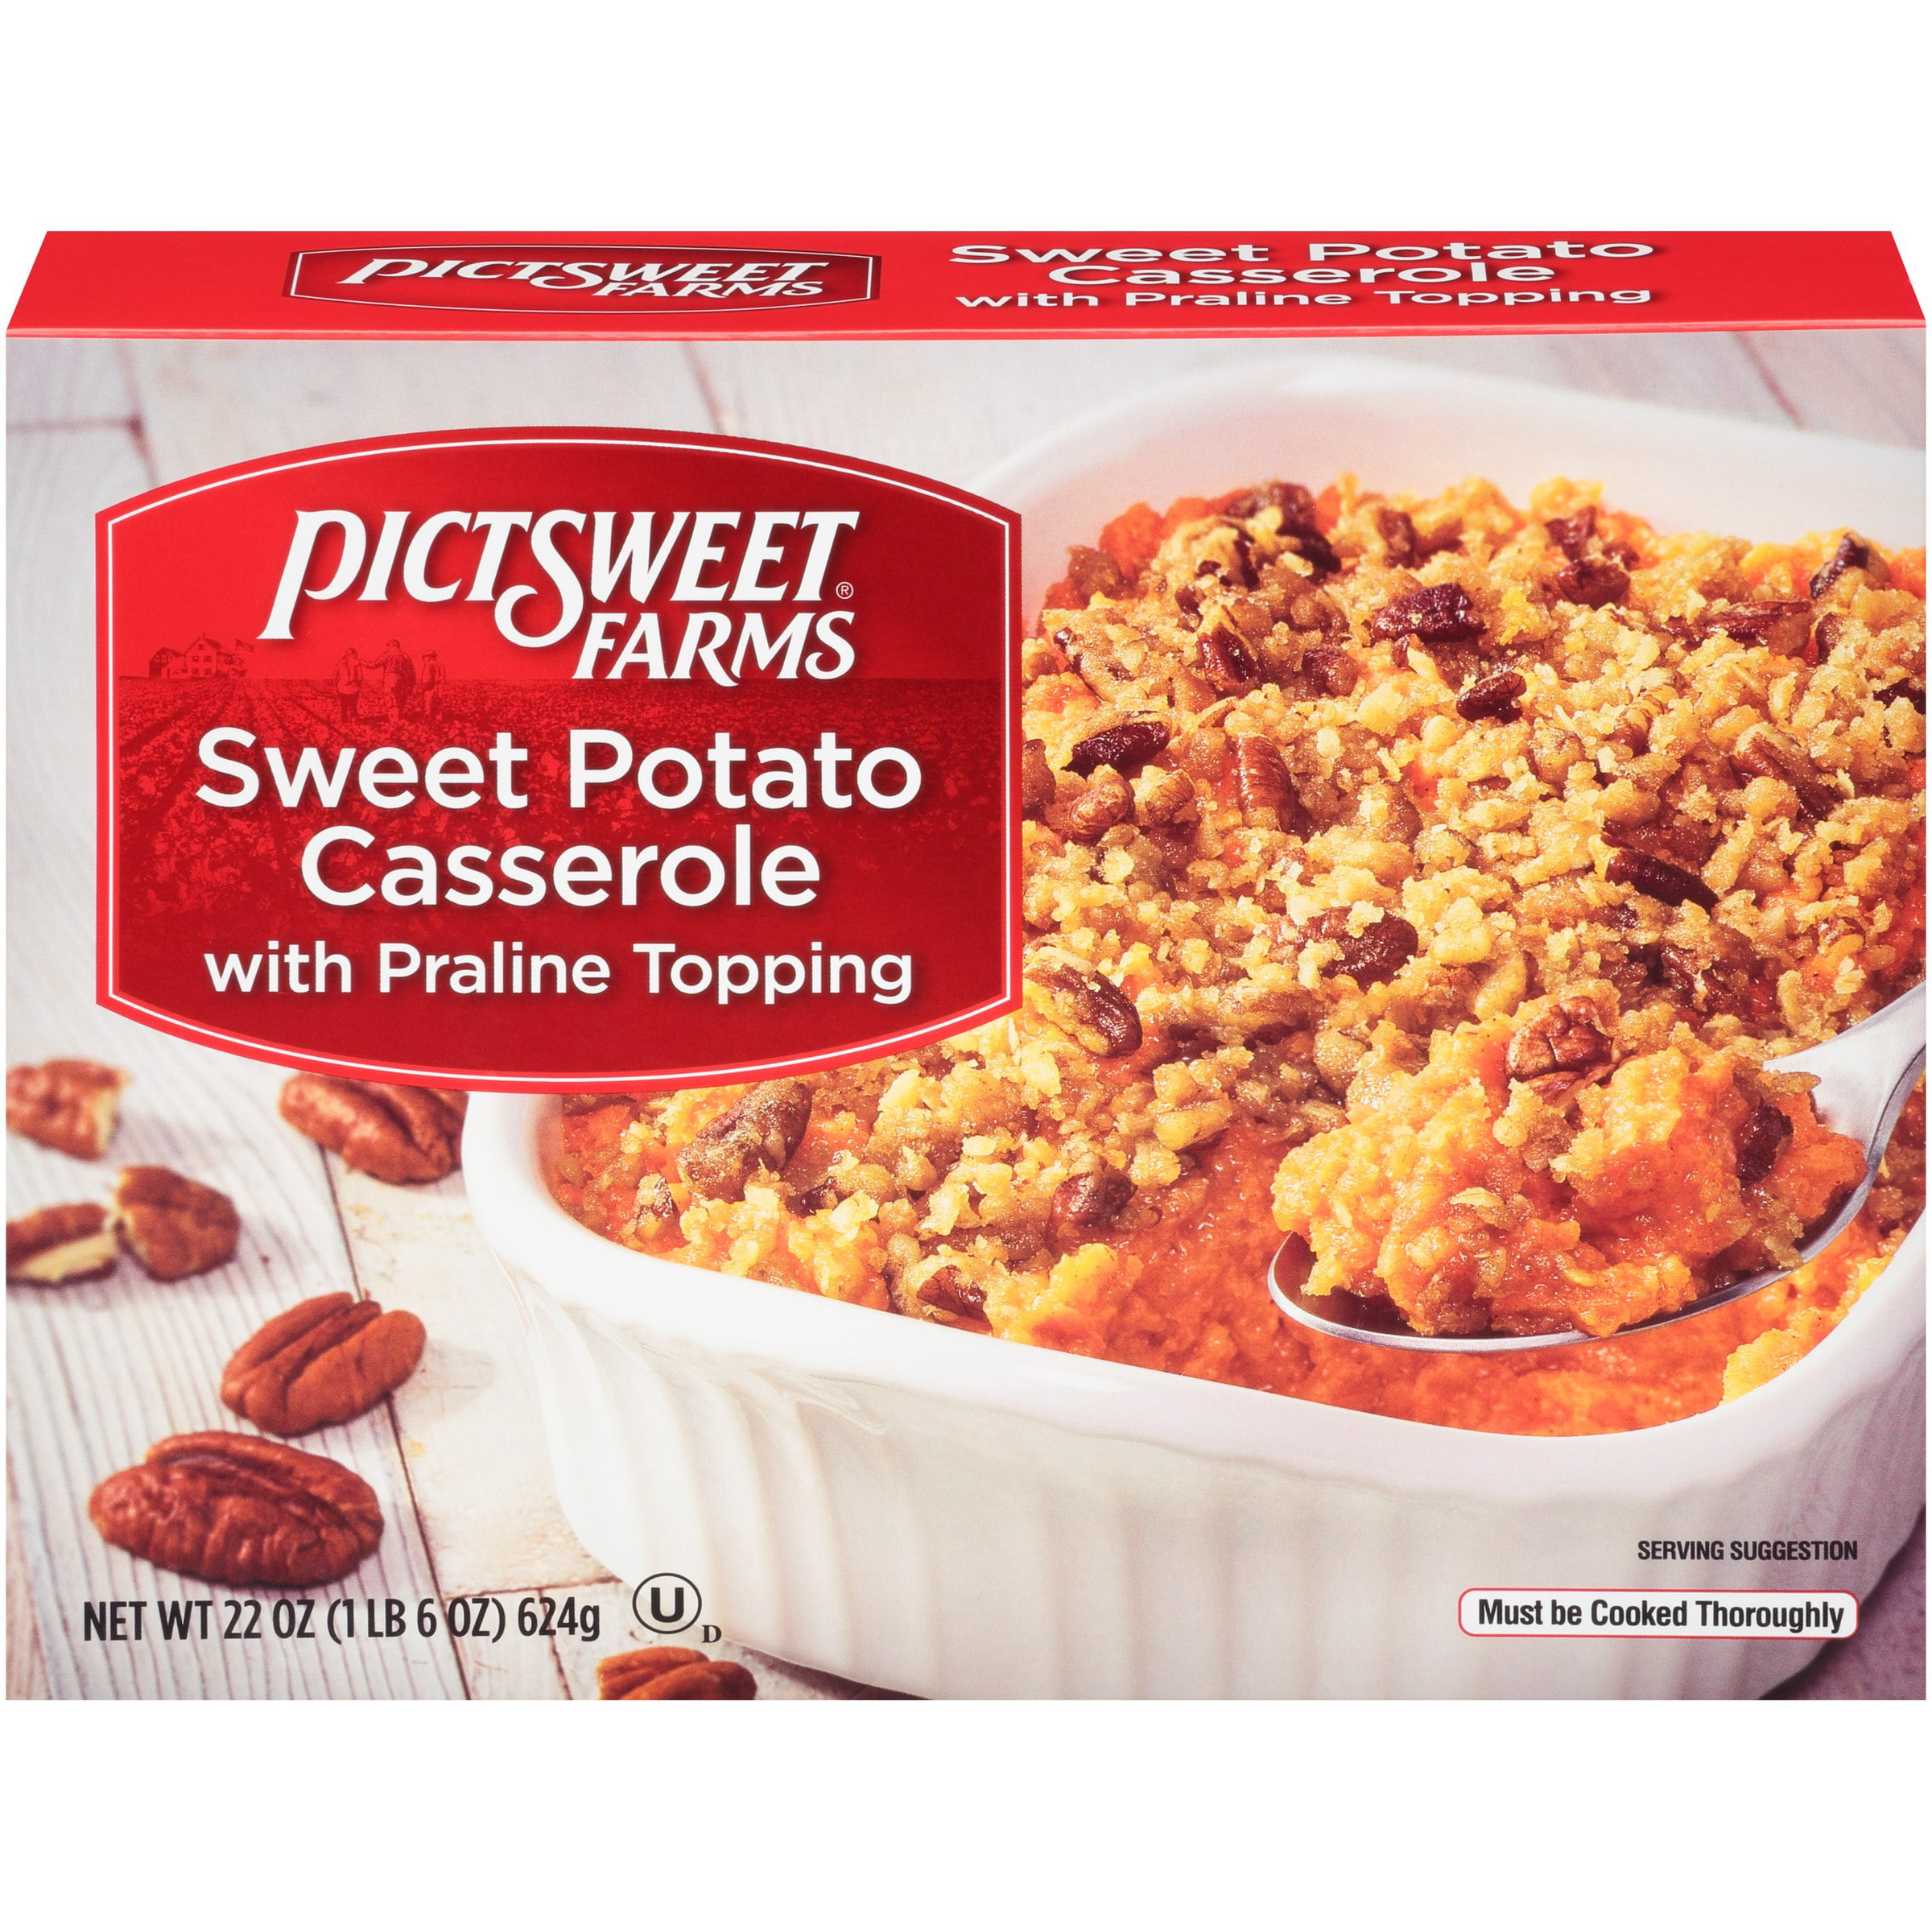 Pictsweet Farms® Sweet Potato Casserole with Praline Topping 22 oz. Box ...